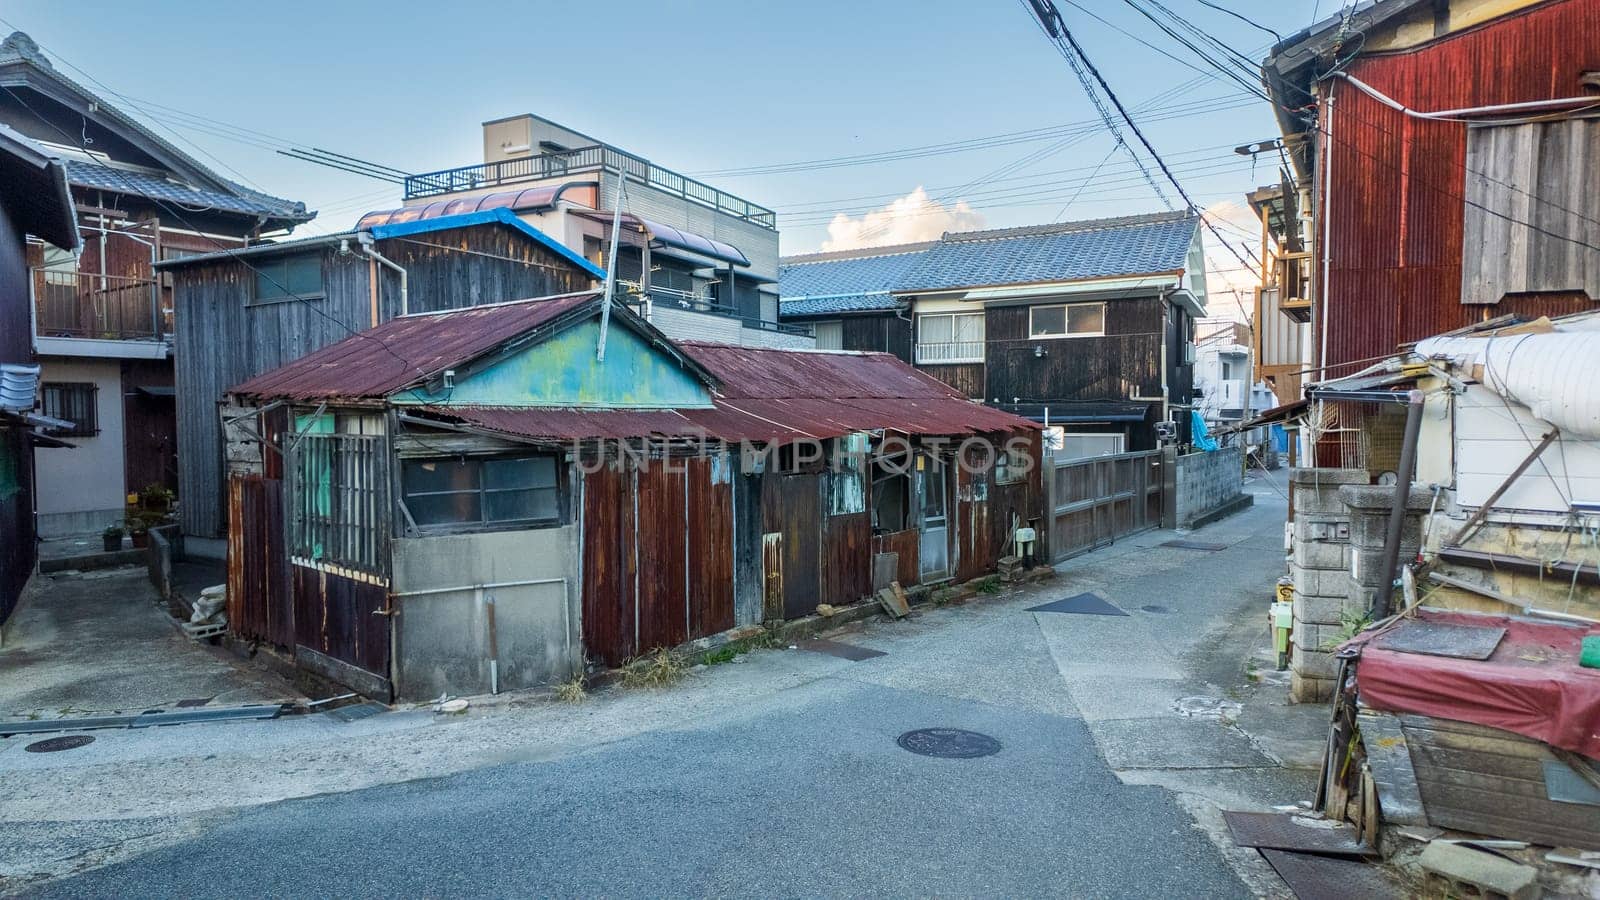 Old house on narrow road in small Japanese town of Iwaya by Osaze